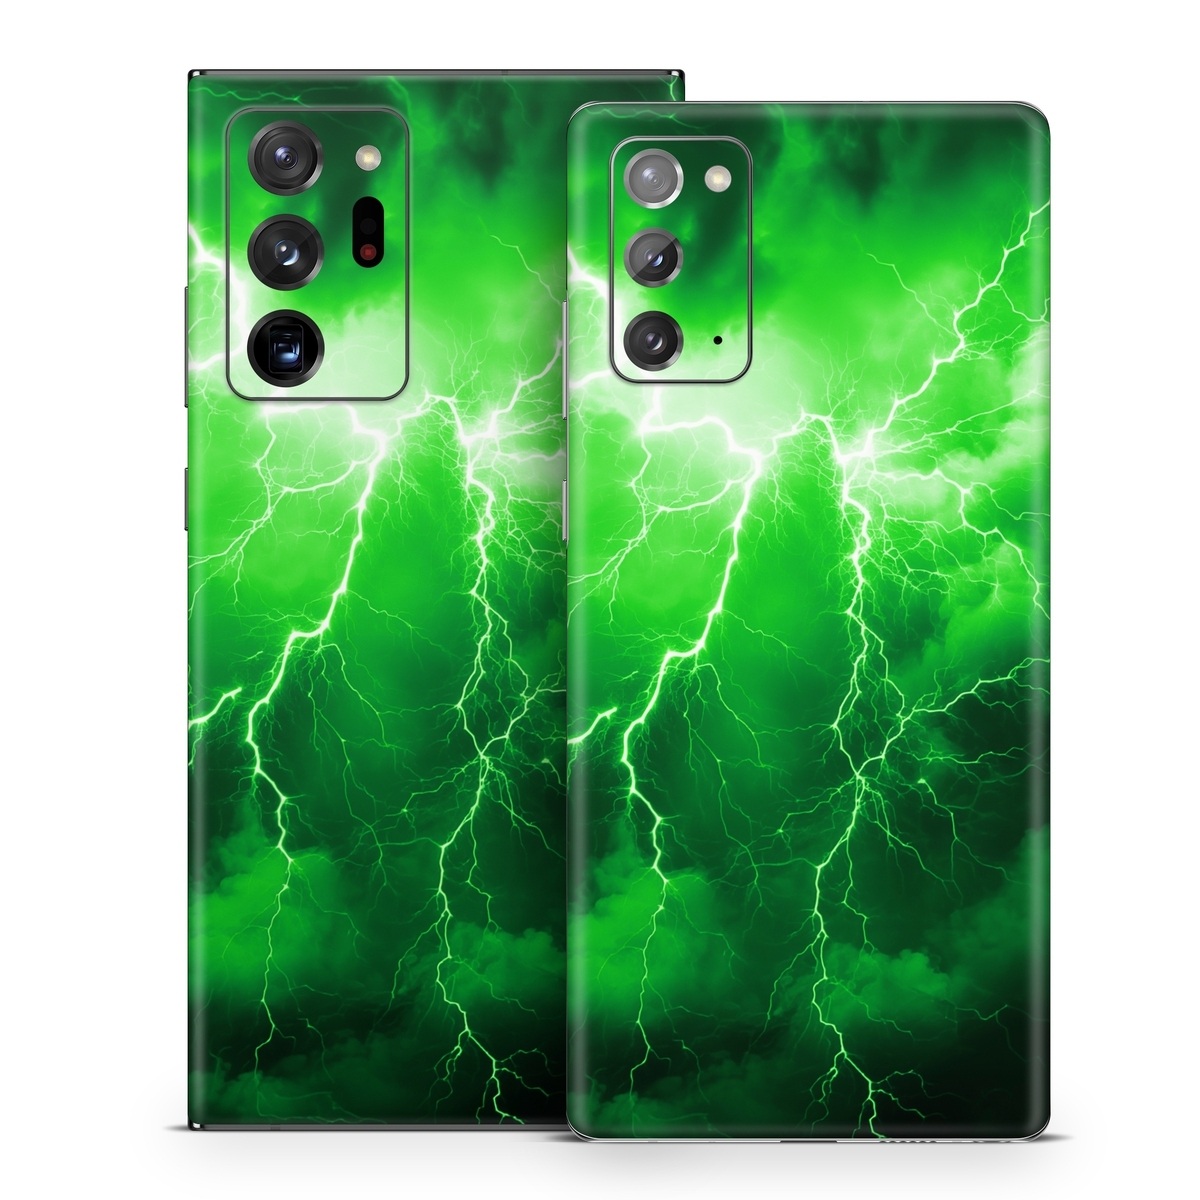  Skin design of Water, Atmosphere, Thunder, Light, Green, Sky, Natural environment, Natural landscape, Electricity, Organism, with black, green colors